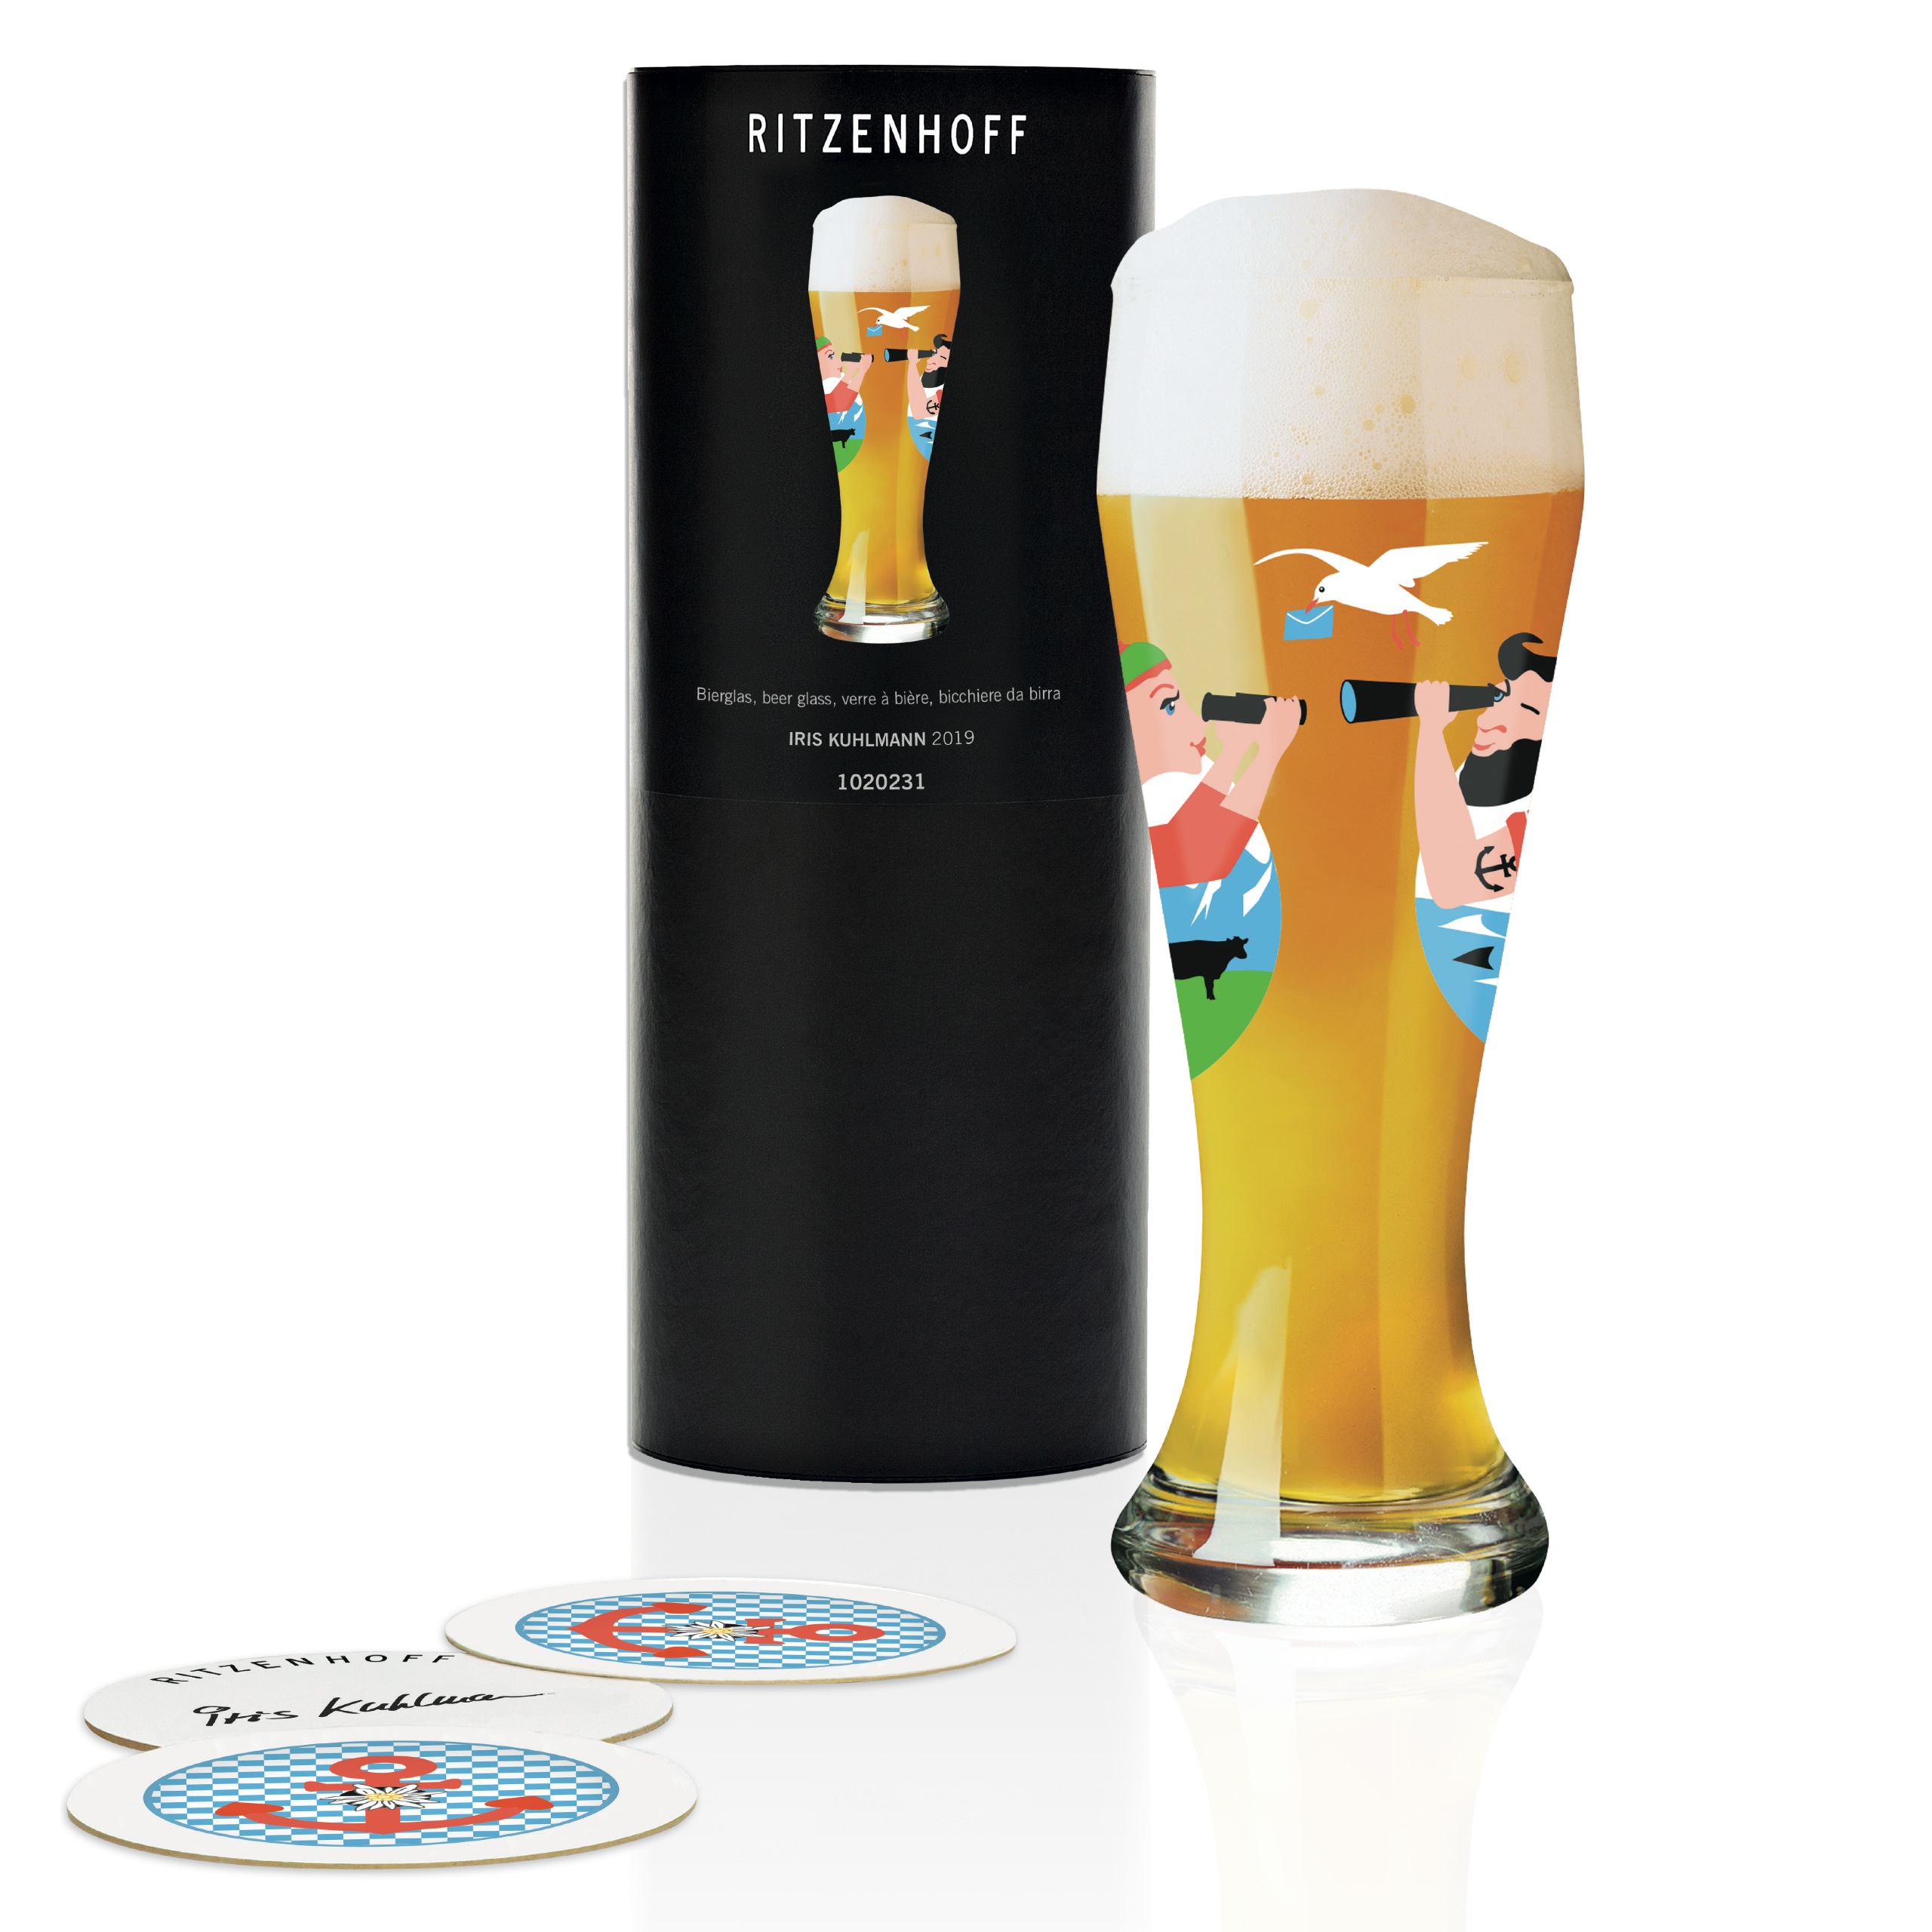 Ritzenhoff Wheat Beer beer glass by I. Kuhlmann 2019 – Craft Box Direct